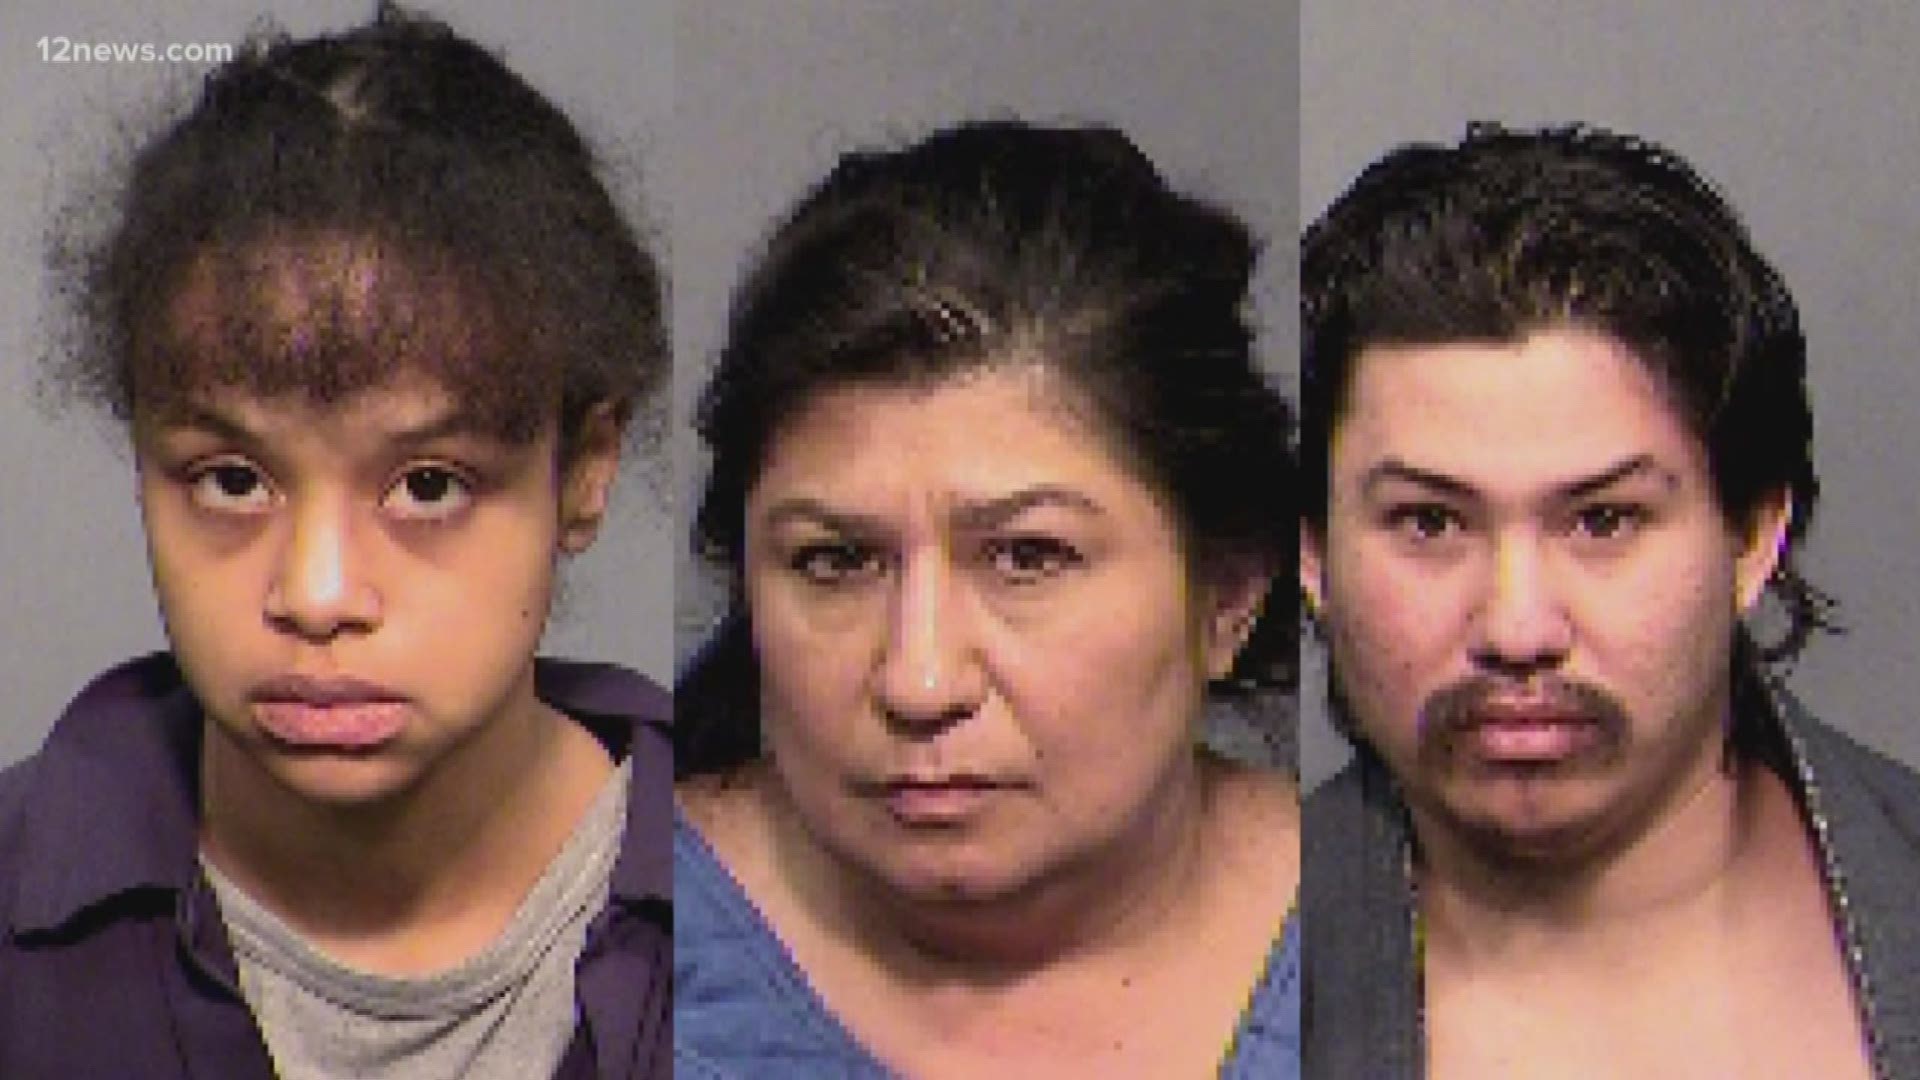 The two parents and grandmother all face charges of first-degree felony homicide and two counts of child abuse.